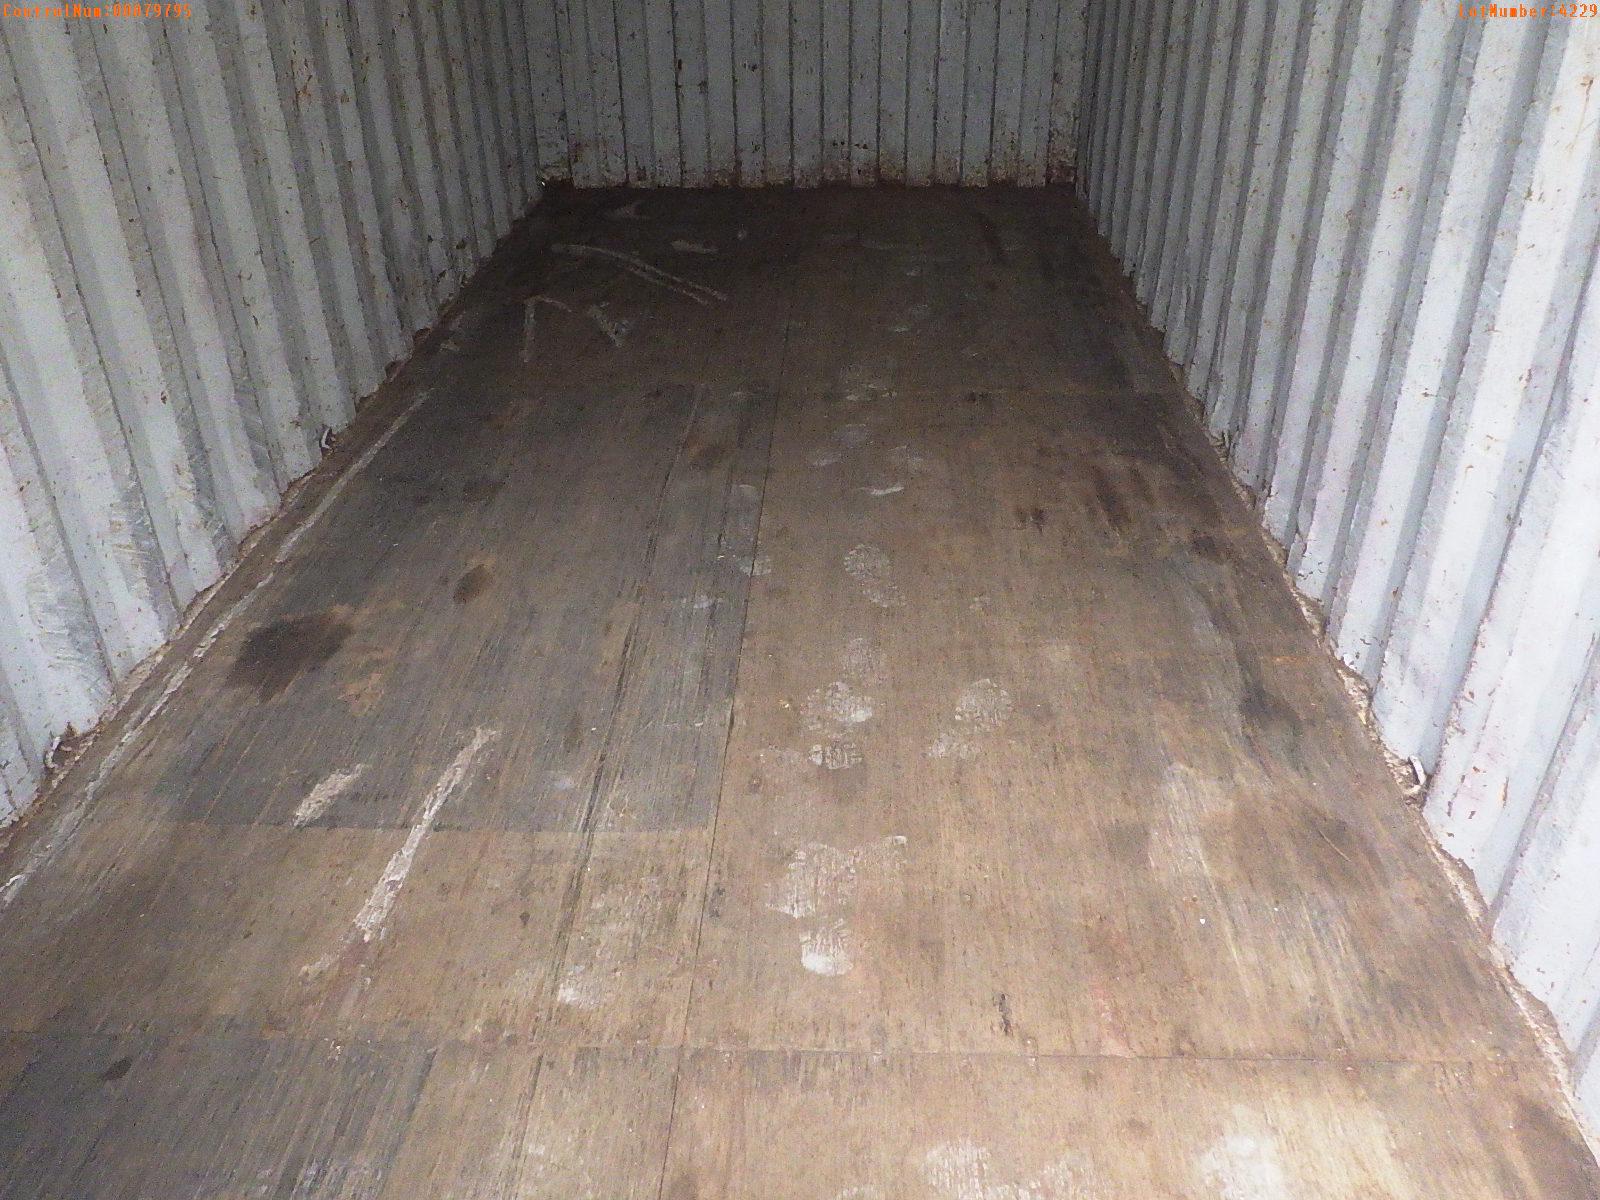 5-04229 (Equip.-Container)  Seller:Private/Dealer TRITON 20 FOOT METAL SHIPPING